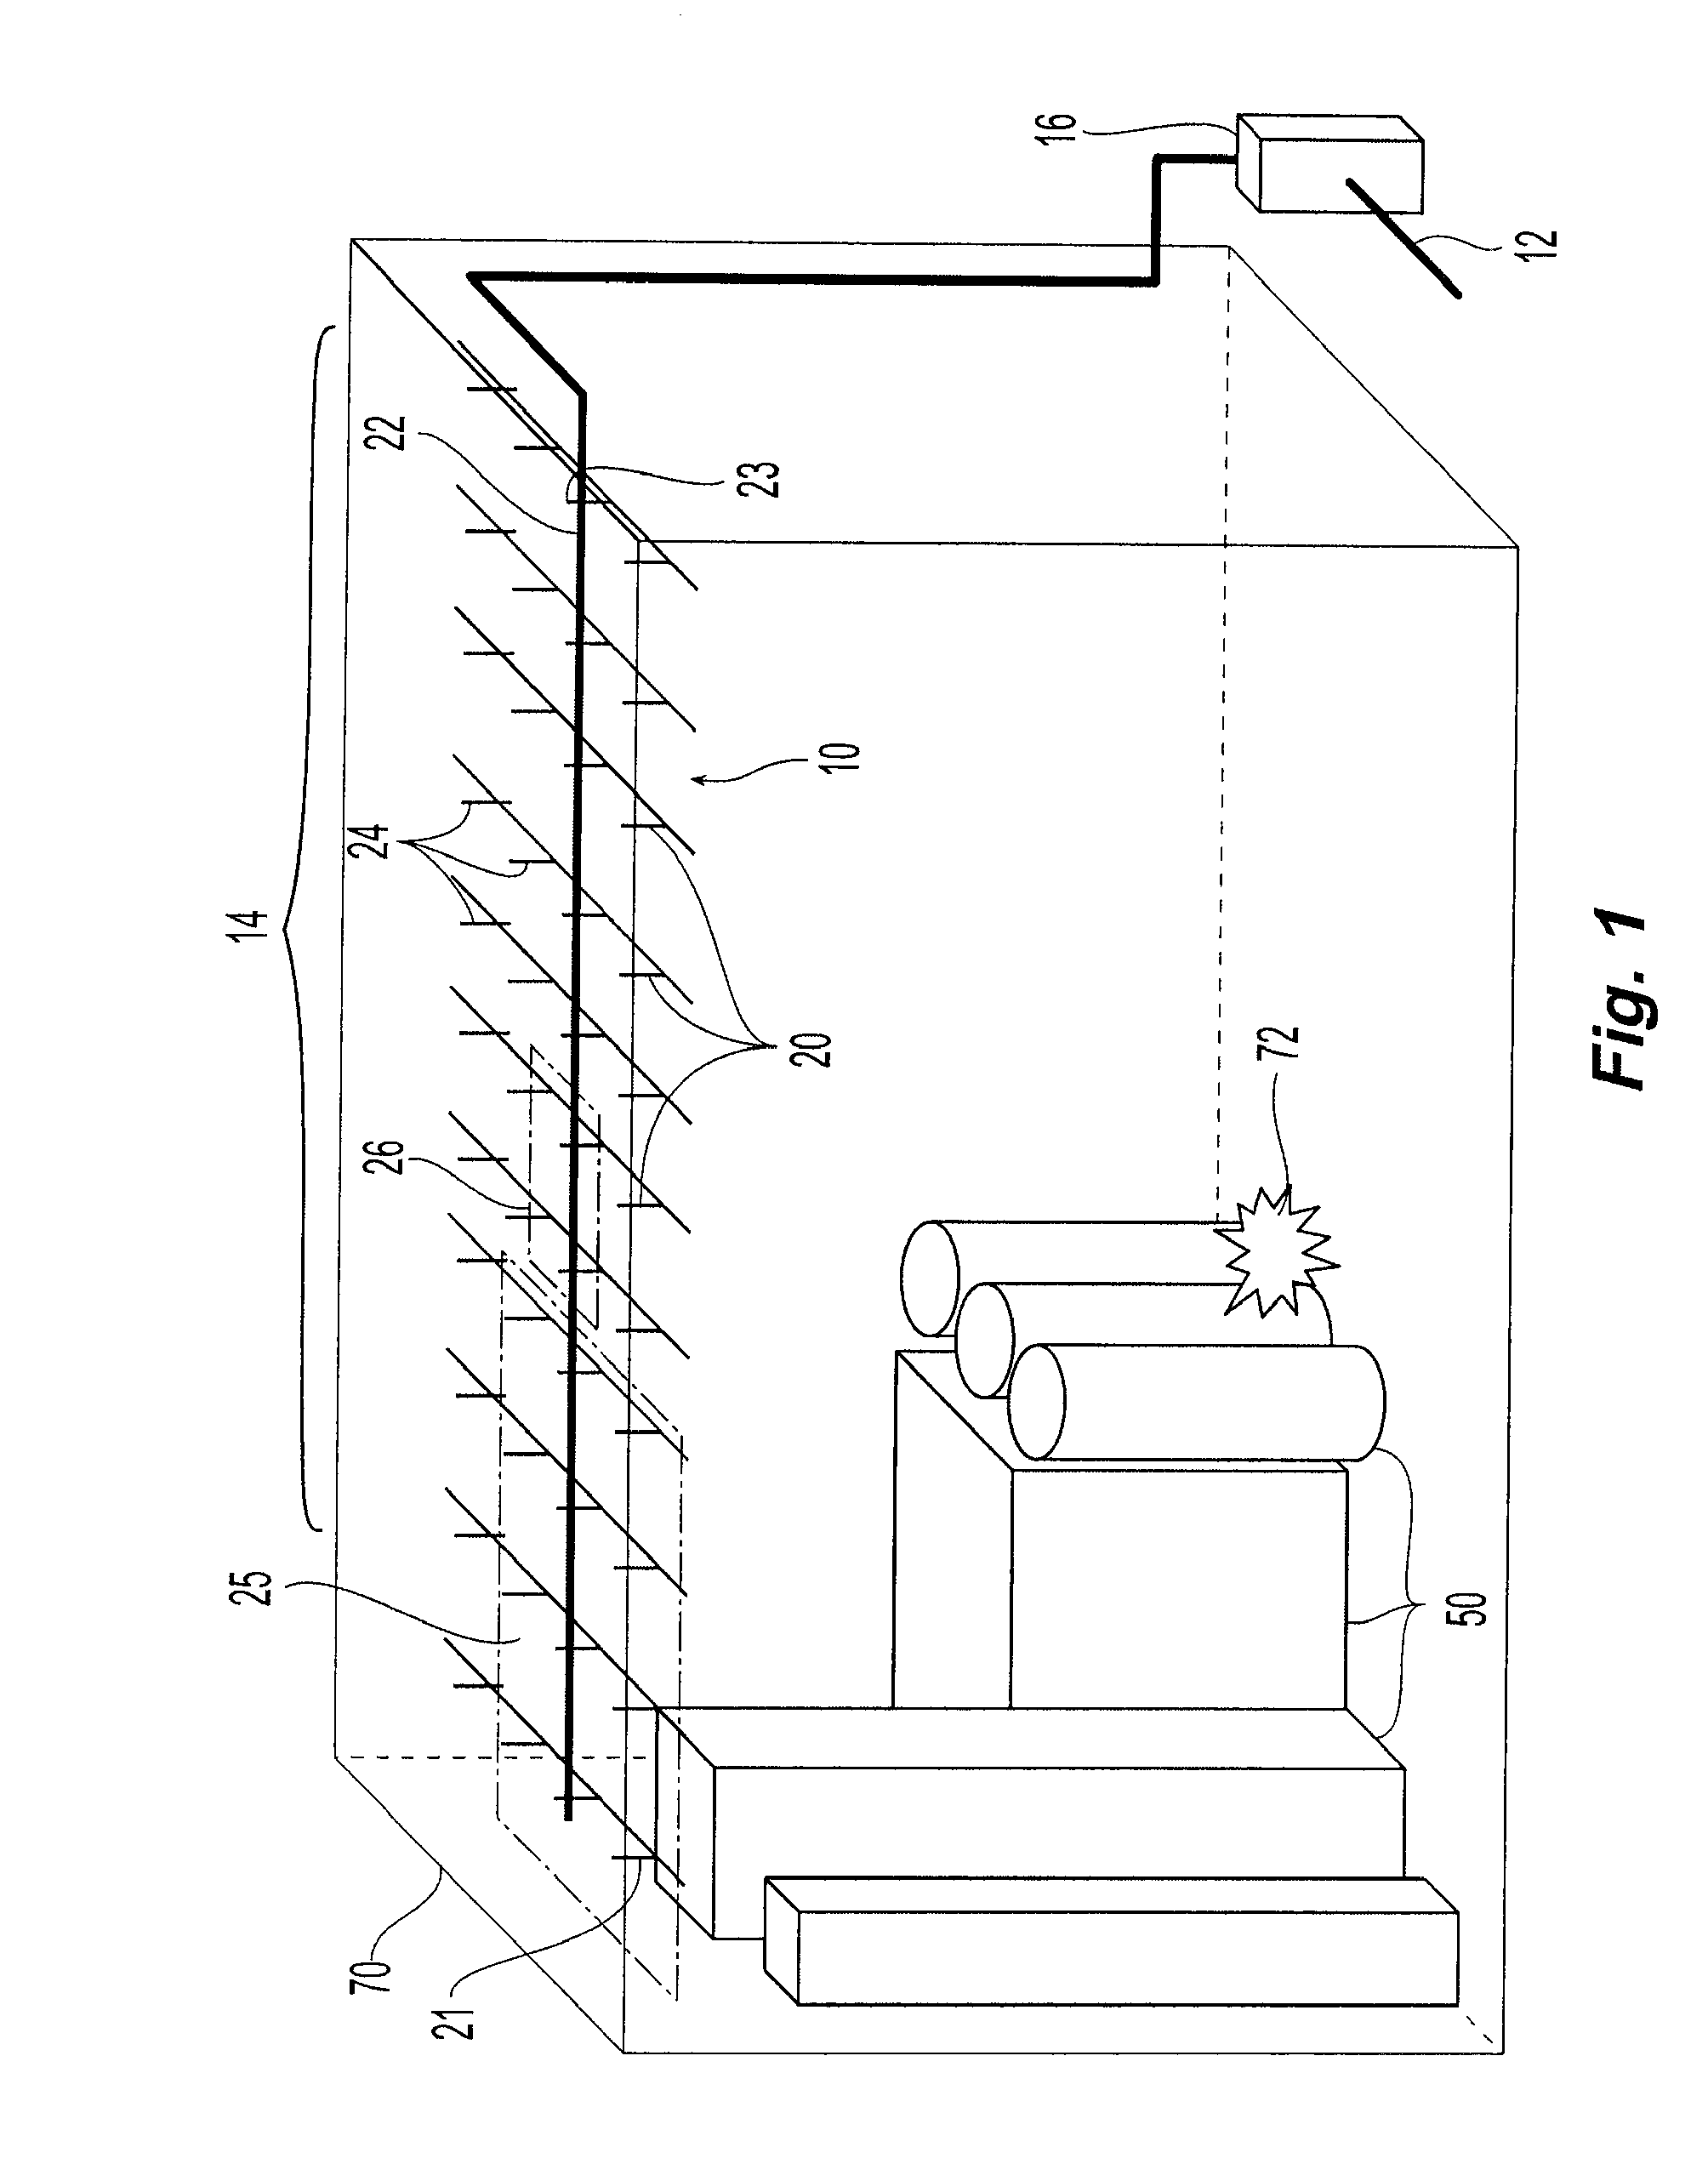 Ceiling-only dry sprinkler systems and methods for addressing a storage occupancy fire